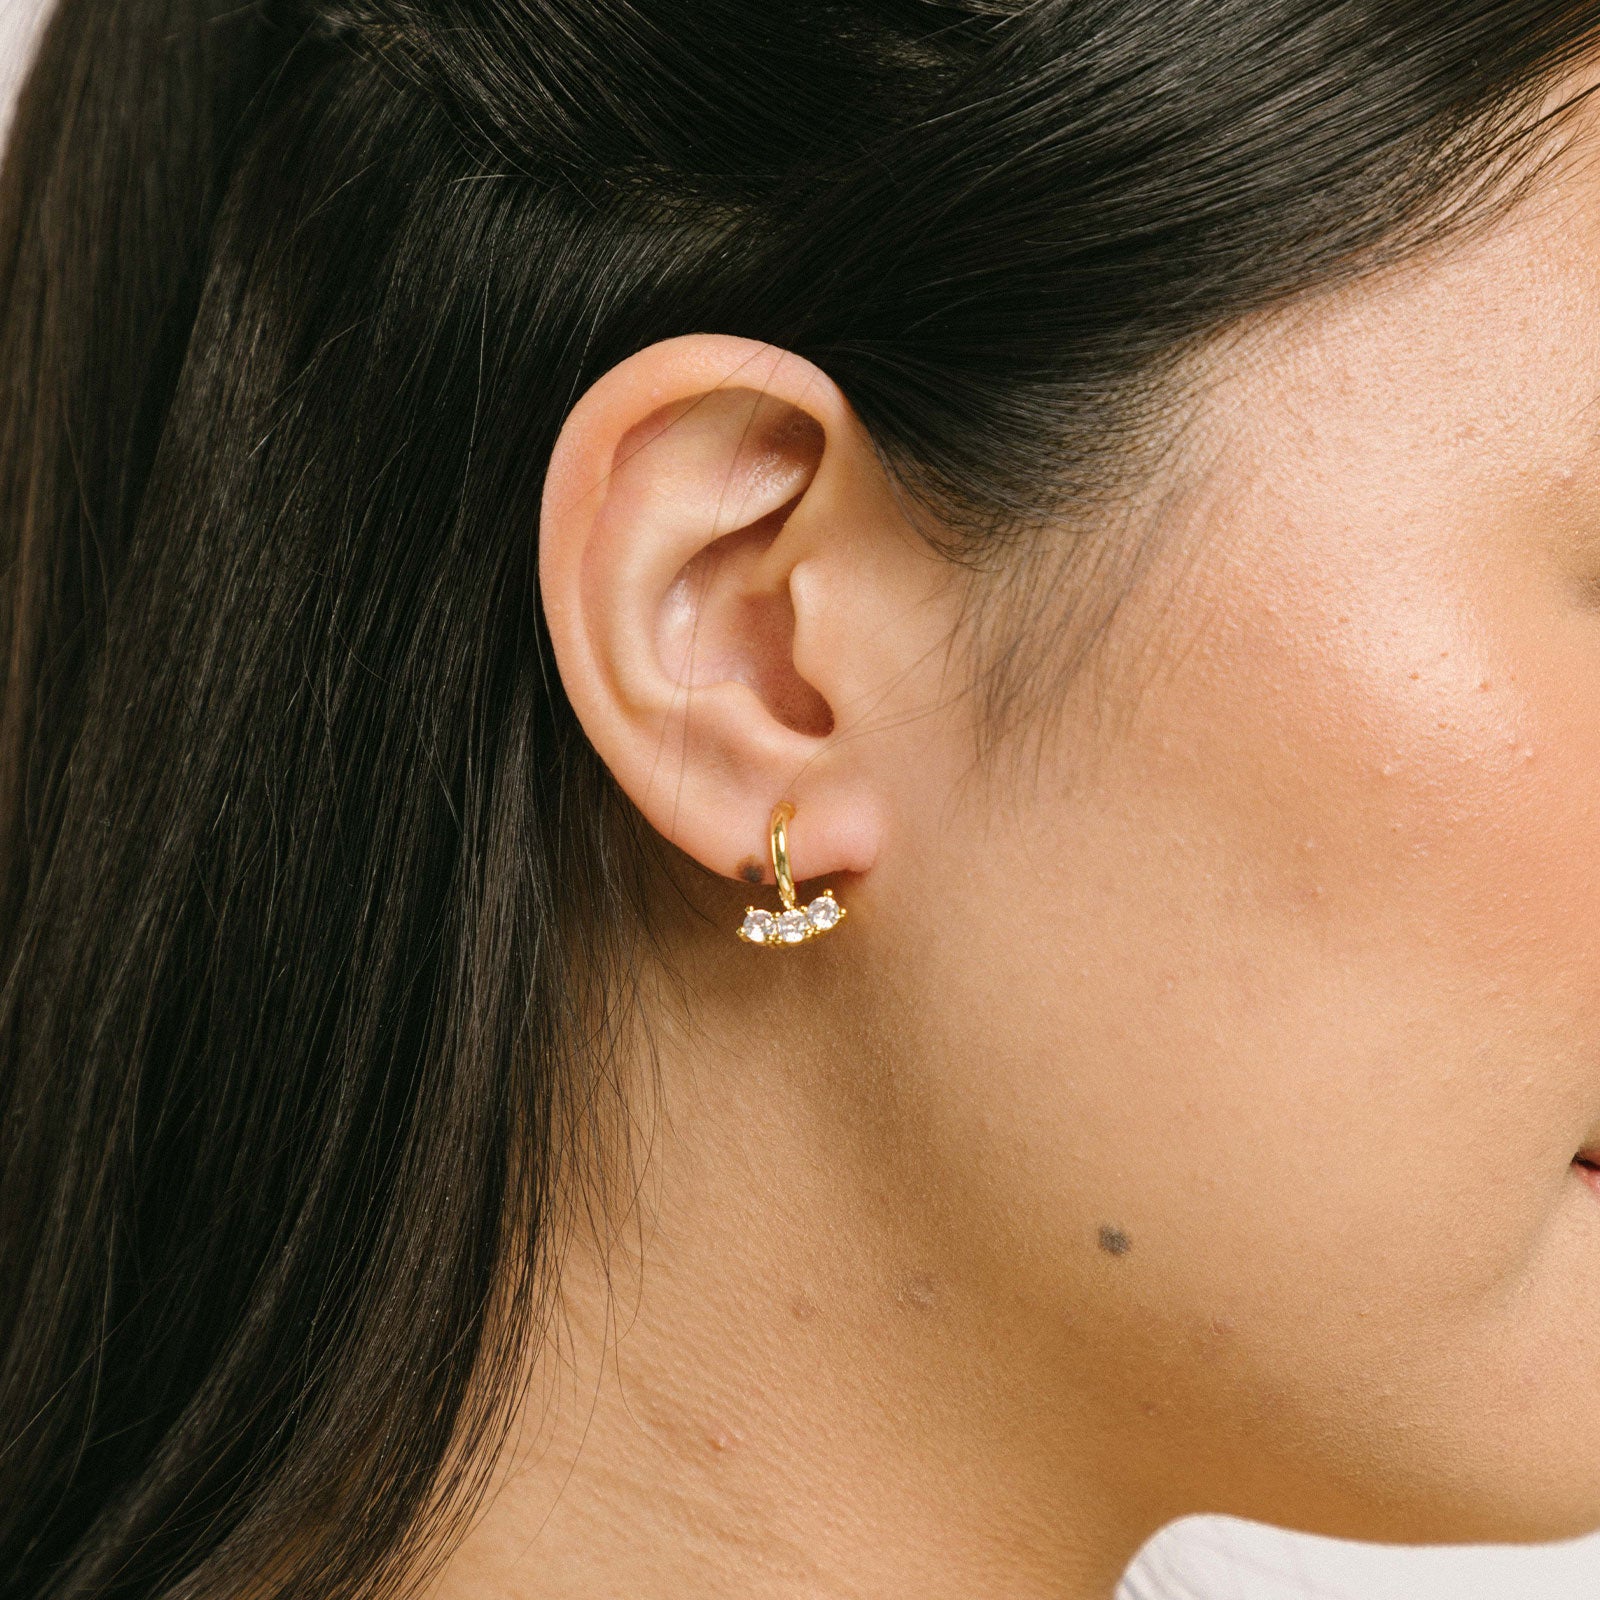 A model wearing the Juliette Clip-On Earrings offer a medium-strength, secure hold that lasts 24 hours. Easily adjustable with a gentle squeeze, these Mosquito Coil Clip-Ons are ideal for thick/large ears as well as sensitive ears. Crafted with gold-tone plated metal alloy and cubic zirconia, this item is sold as a single pair.